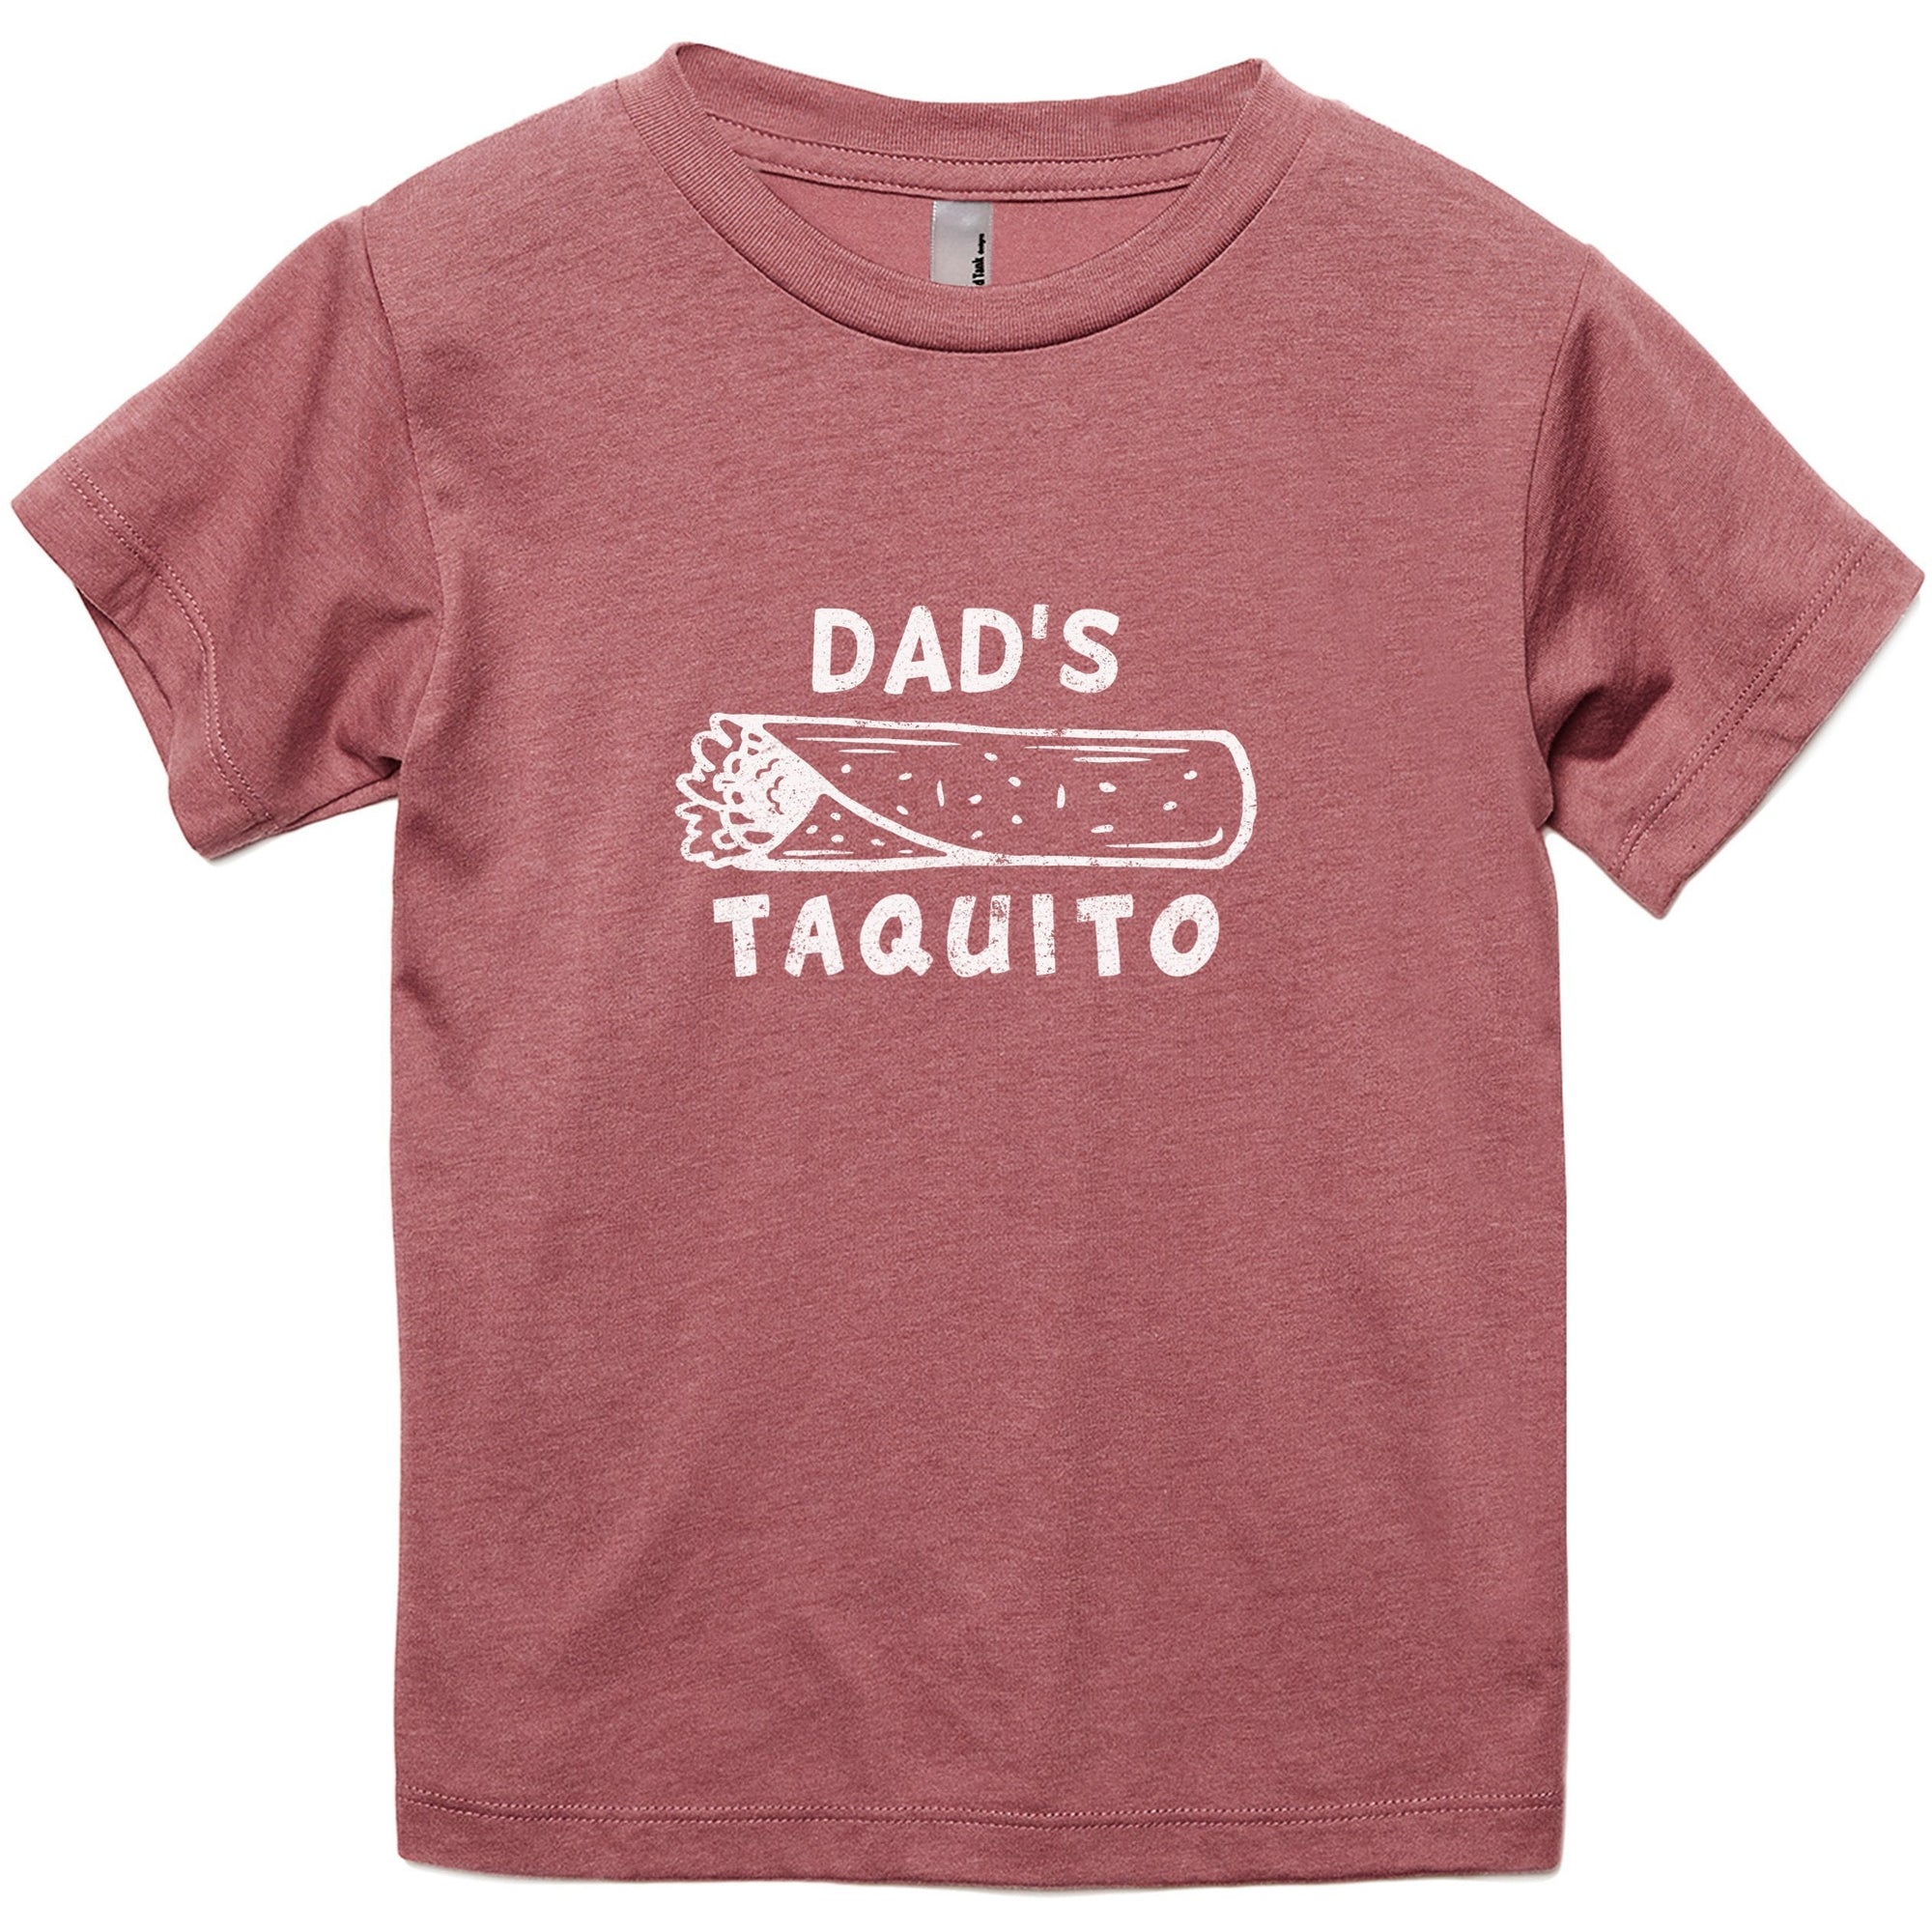 Dad's Taquito - thread tank | Stories you can wear.